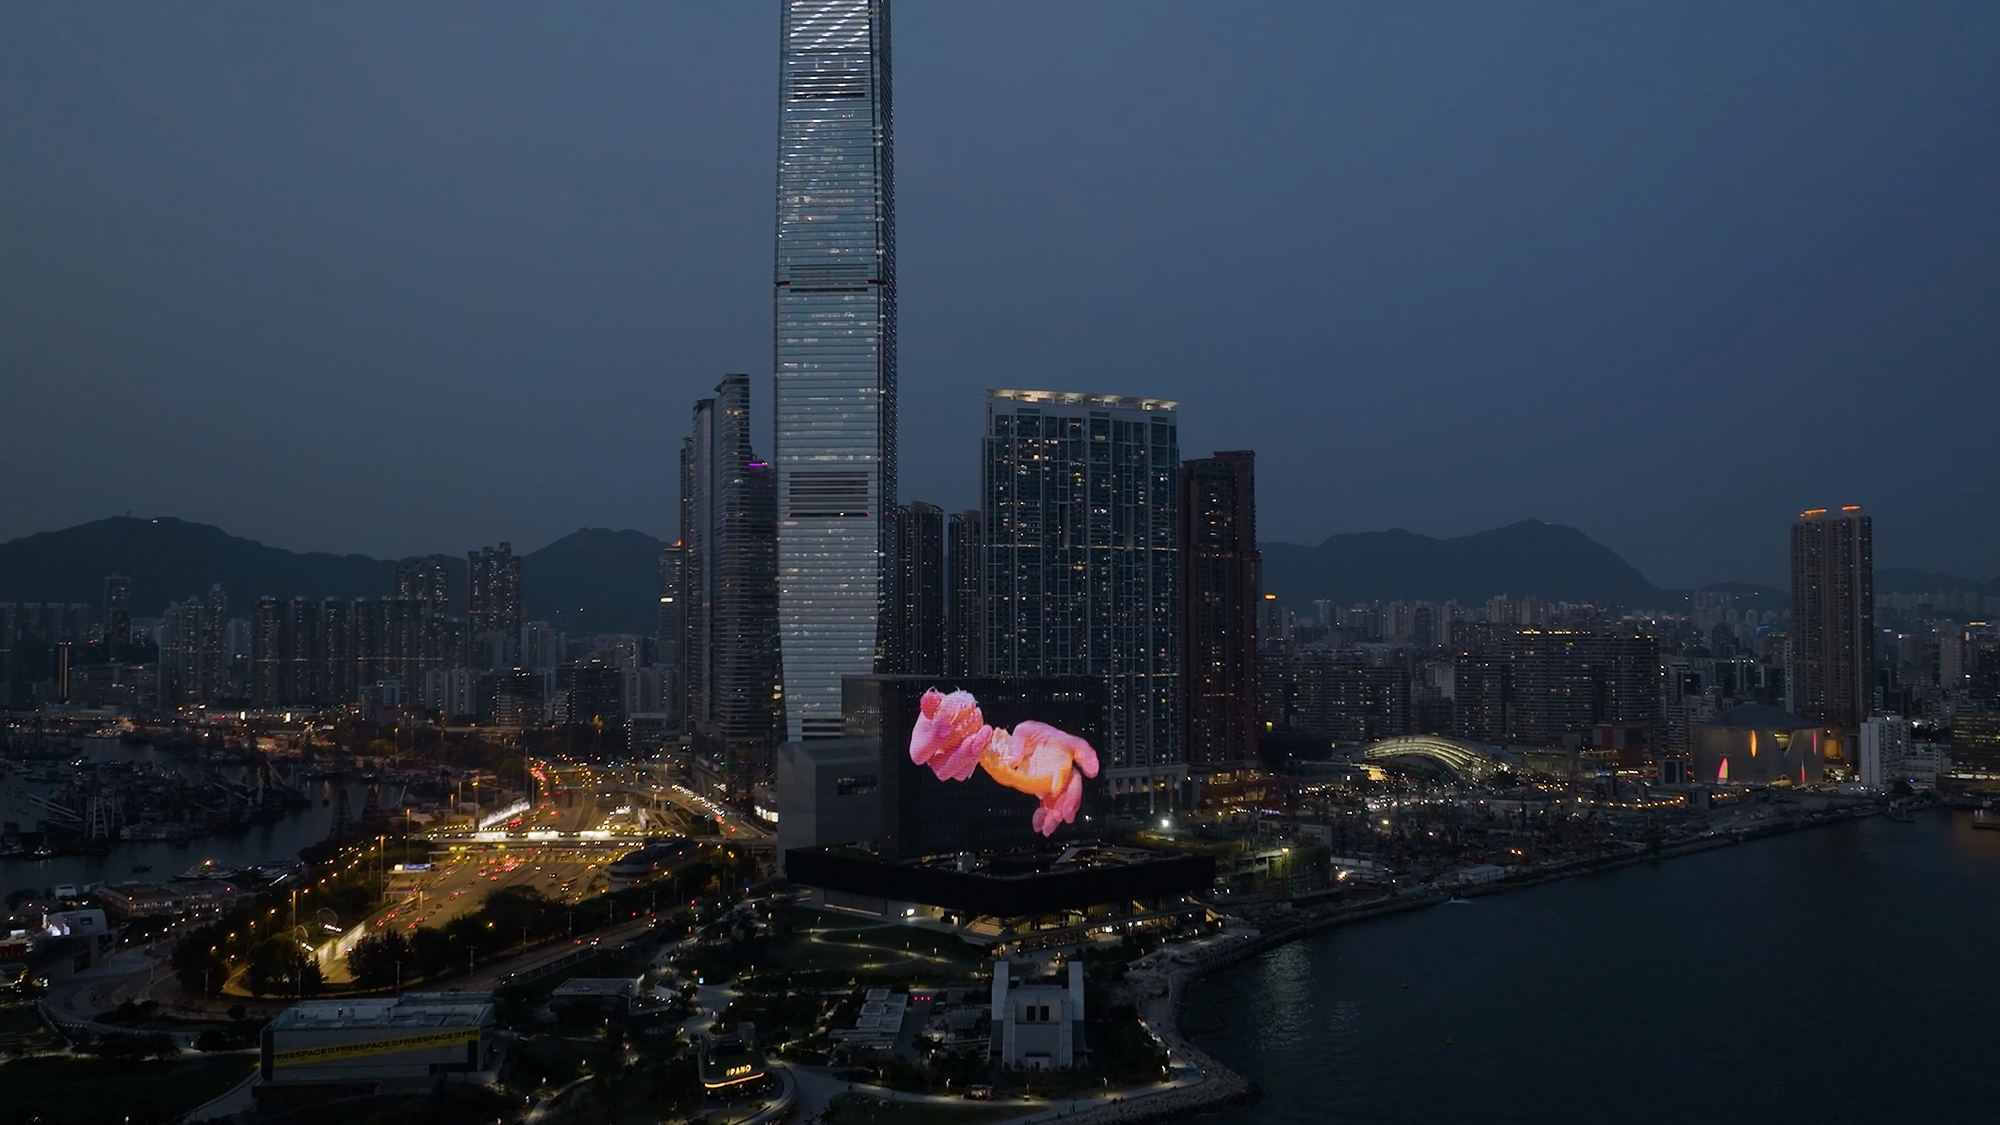 Hong Kong skyline with M+ Museum